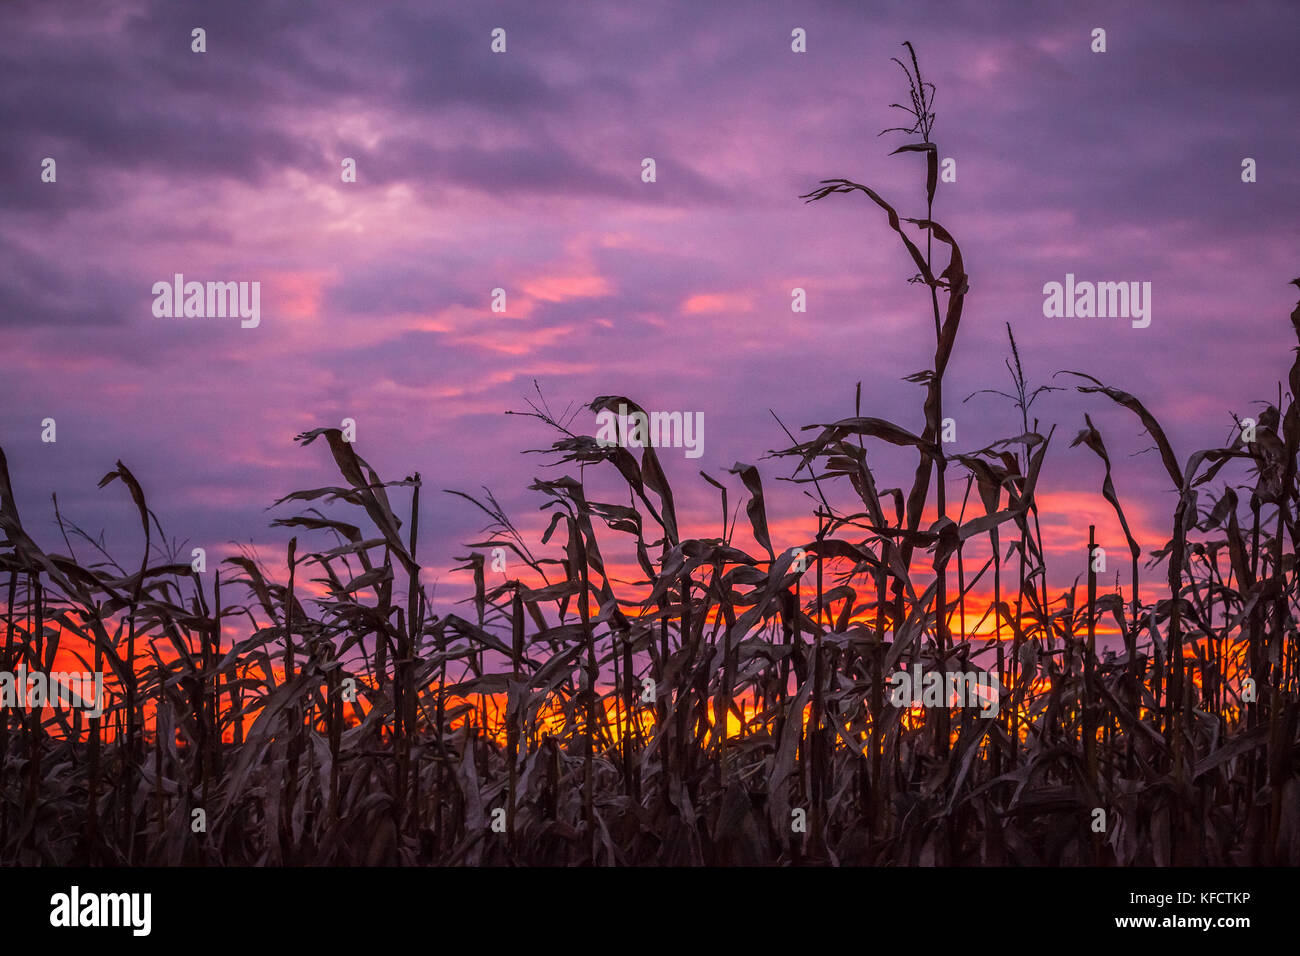 Wind whipped corn stalks silhouetted agains a dramatic purple and orange fall sunset. Stock Photo